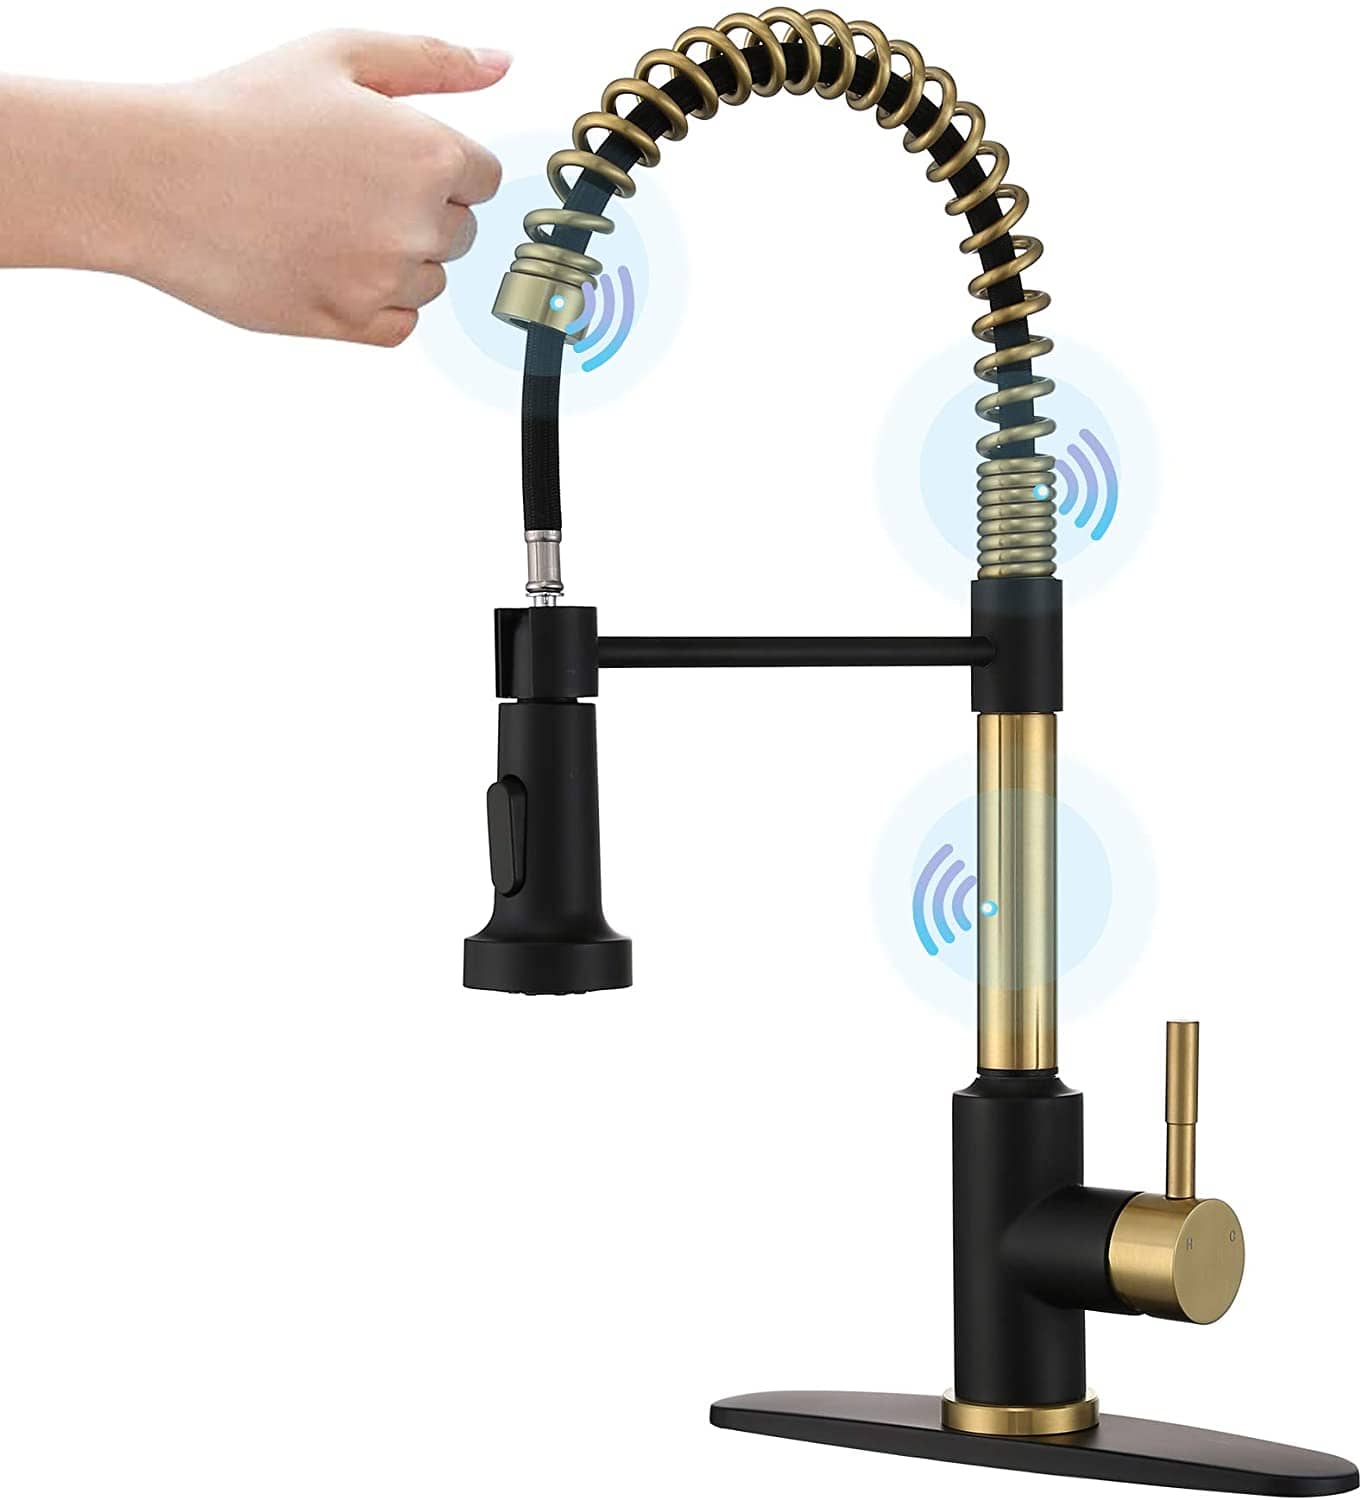 ARRISEA Touch on Single Handle Pull Out Sprayer Kitchen Sink Faucet